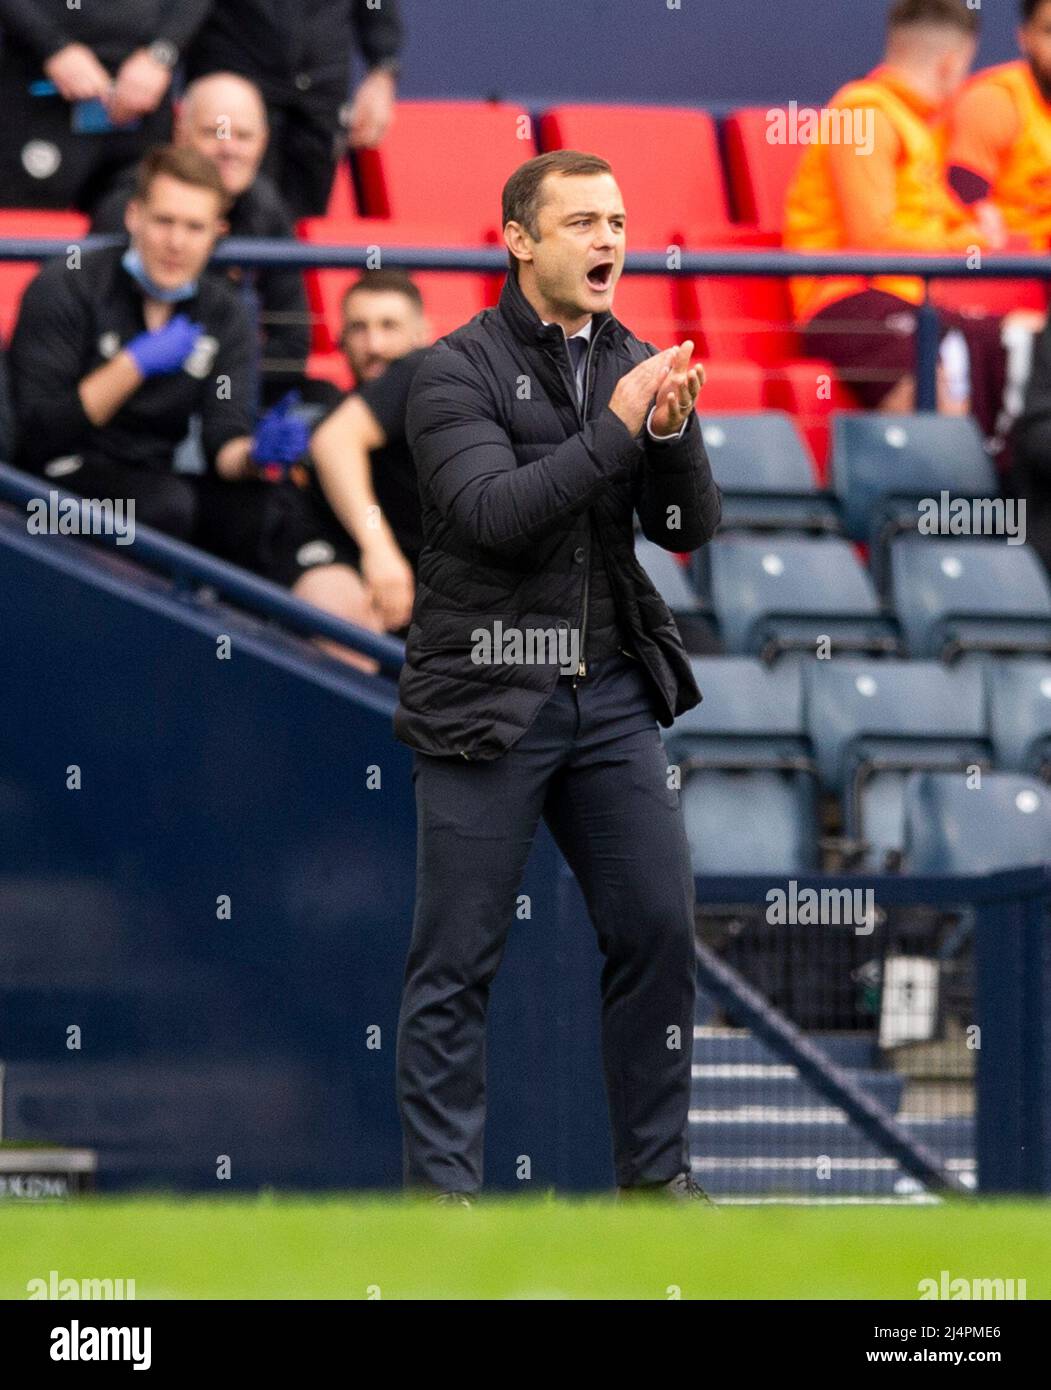 Glasgow, UK. 07th Apr, 2022. Scottish Cup semi final - Heart of Midlothian FC v Hibernian FC 07/04/2022 Pic shows: HibsÕ Manager, Shaun Maloney, shouts instructions to his team as Hearts take on Hibs in the Scottish Cup semi final at Hampden Park, Glasgow Credit: Ian Jacobs/Alamy Live News Stock Photo